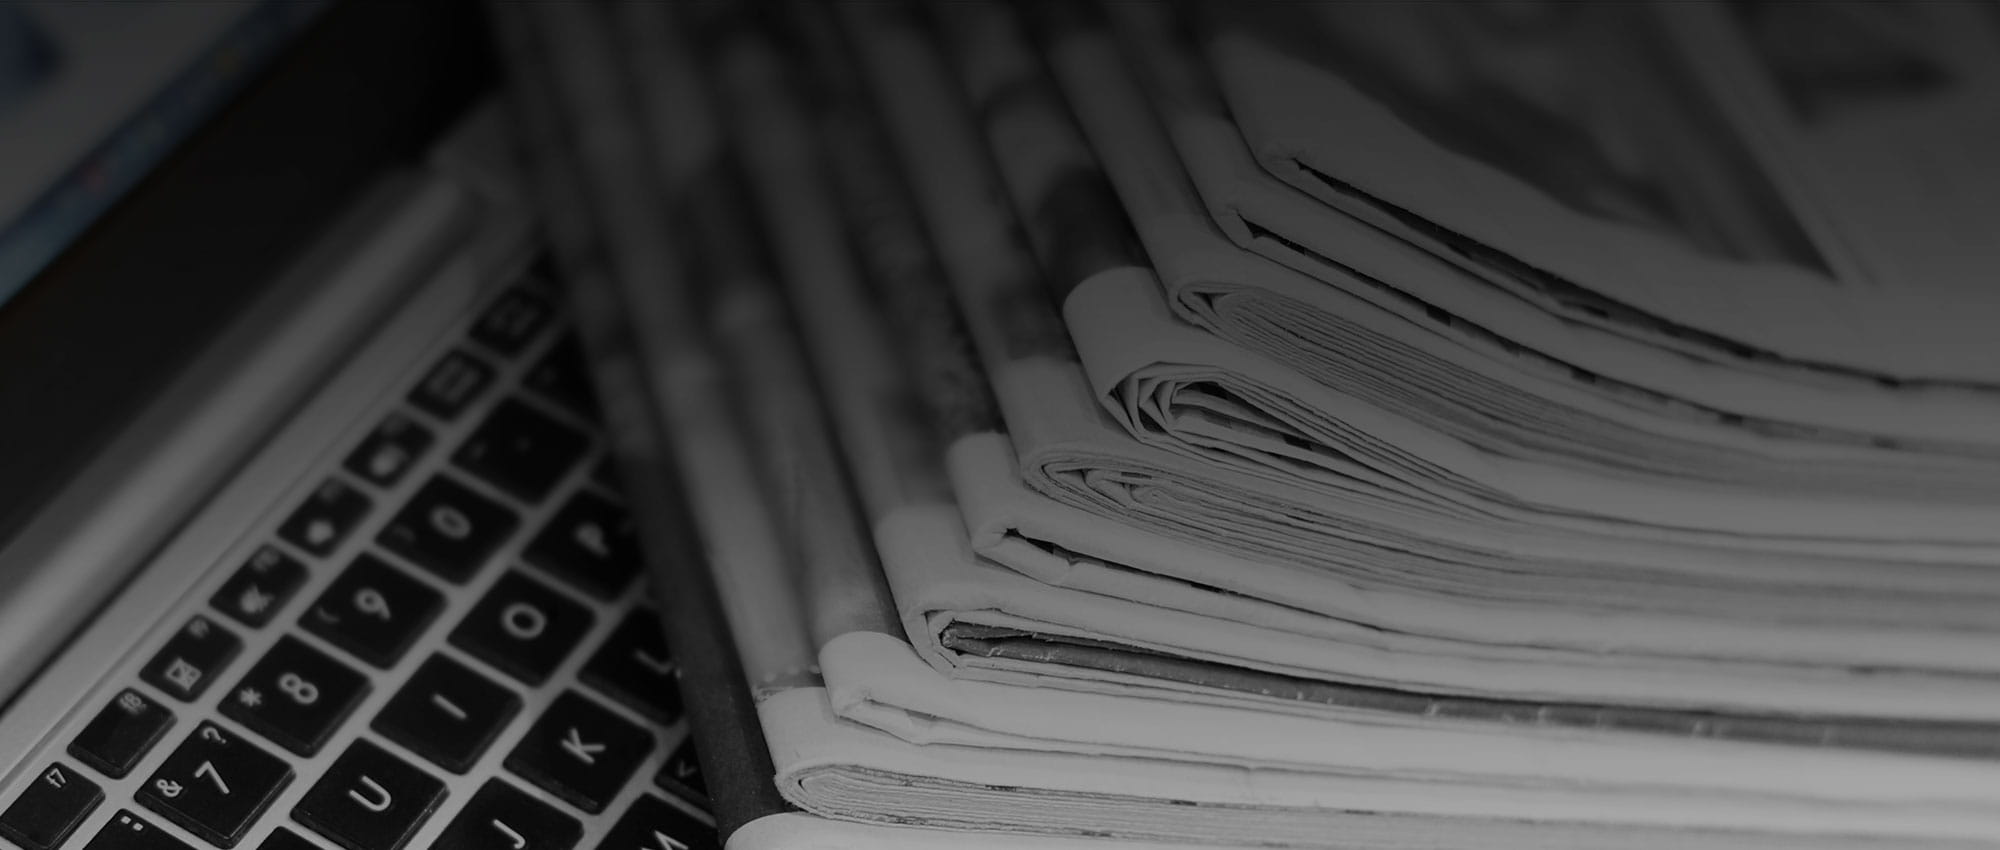 Newspaper stack on an unfolded notebook.